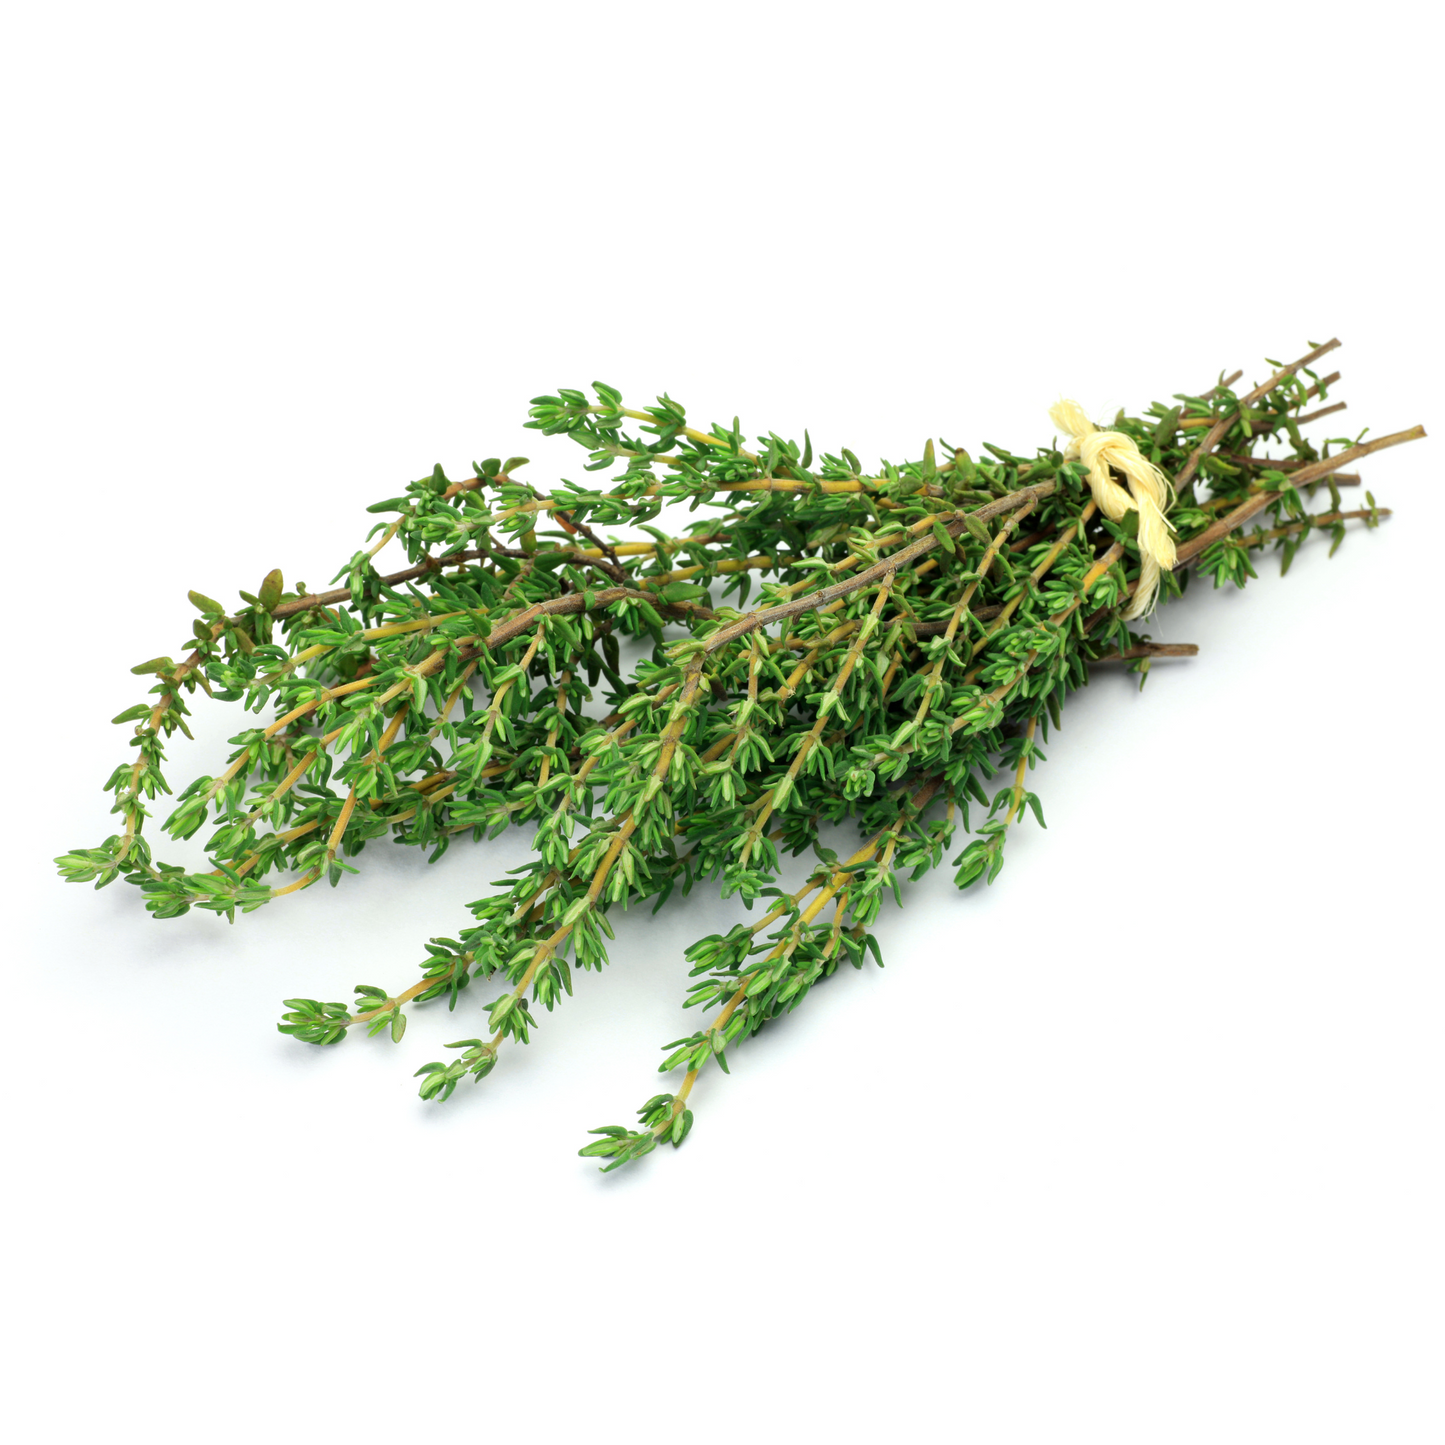 Fresh fully grown thyme sprigs isolated on a white surface